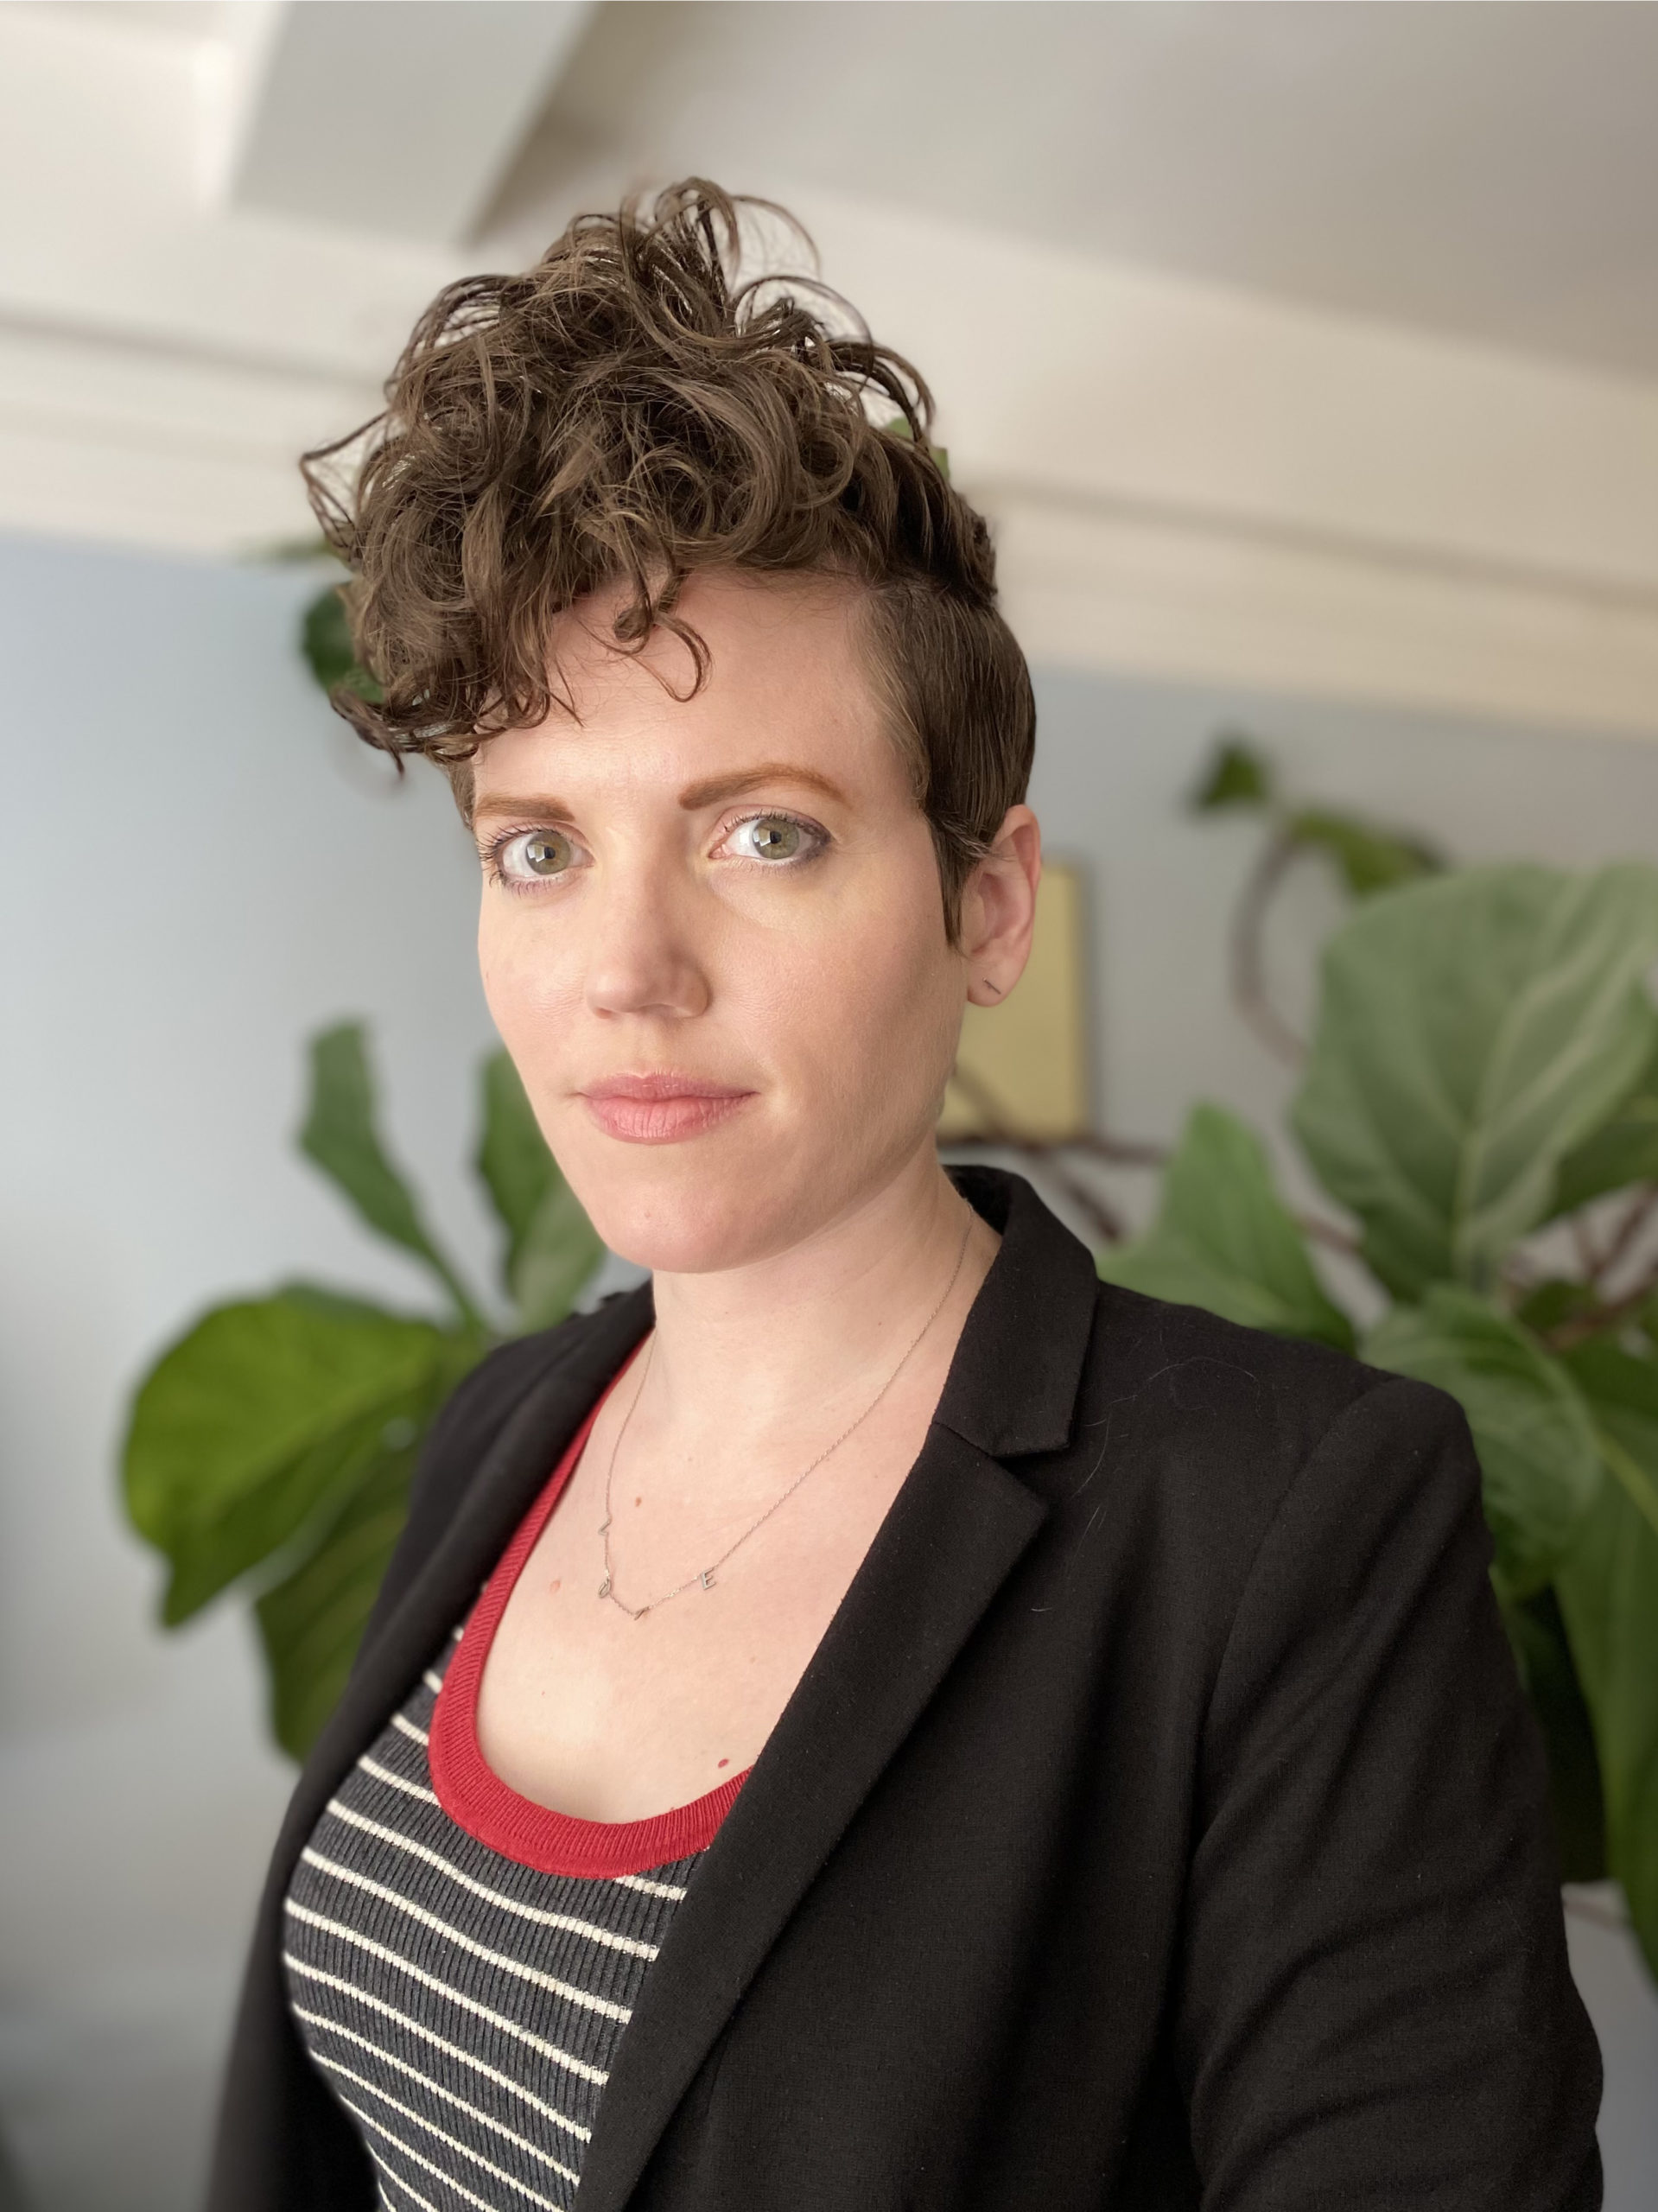 A white woman with short curly hair that falls above her forehead stares directly at the camera. She wears a black blazer over a striped top.